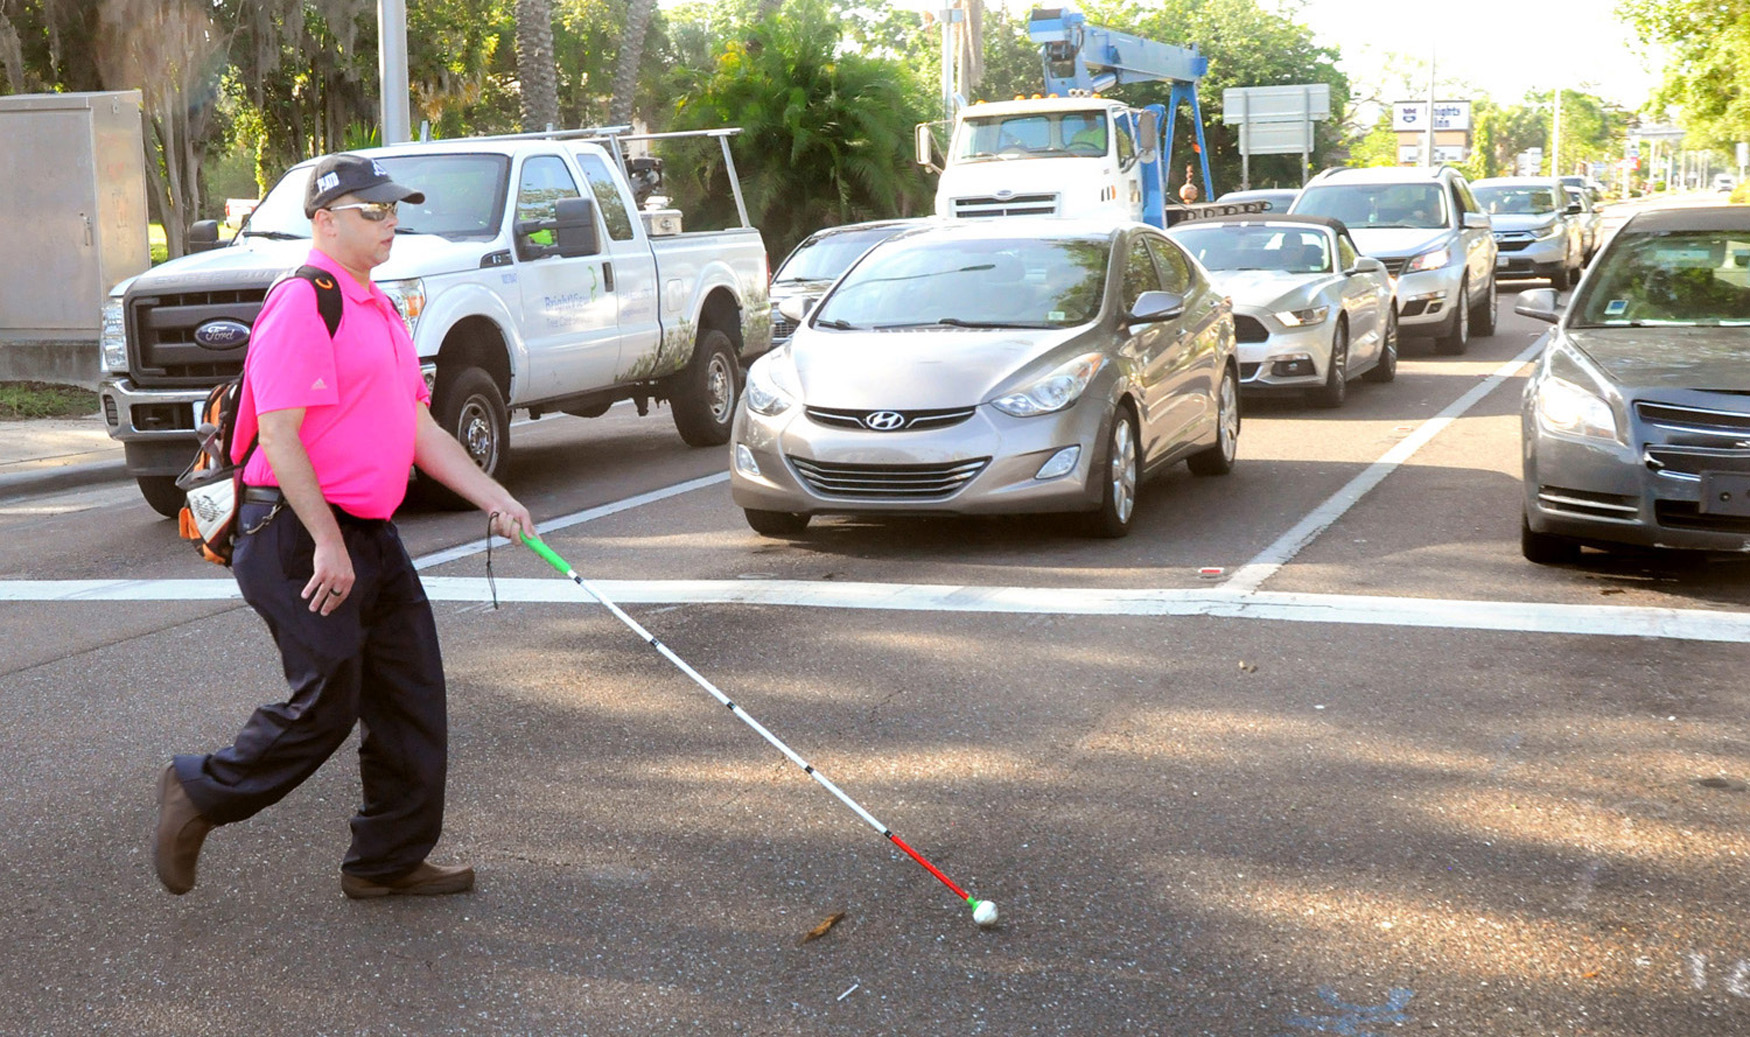 October is White Cane Safety Awareness Month worldwide, a reminder to watch for blind or disabled pedestrians.